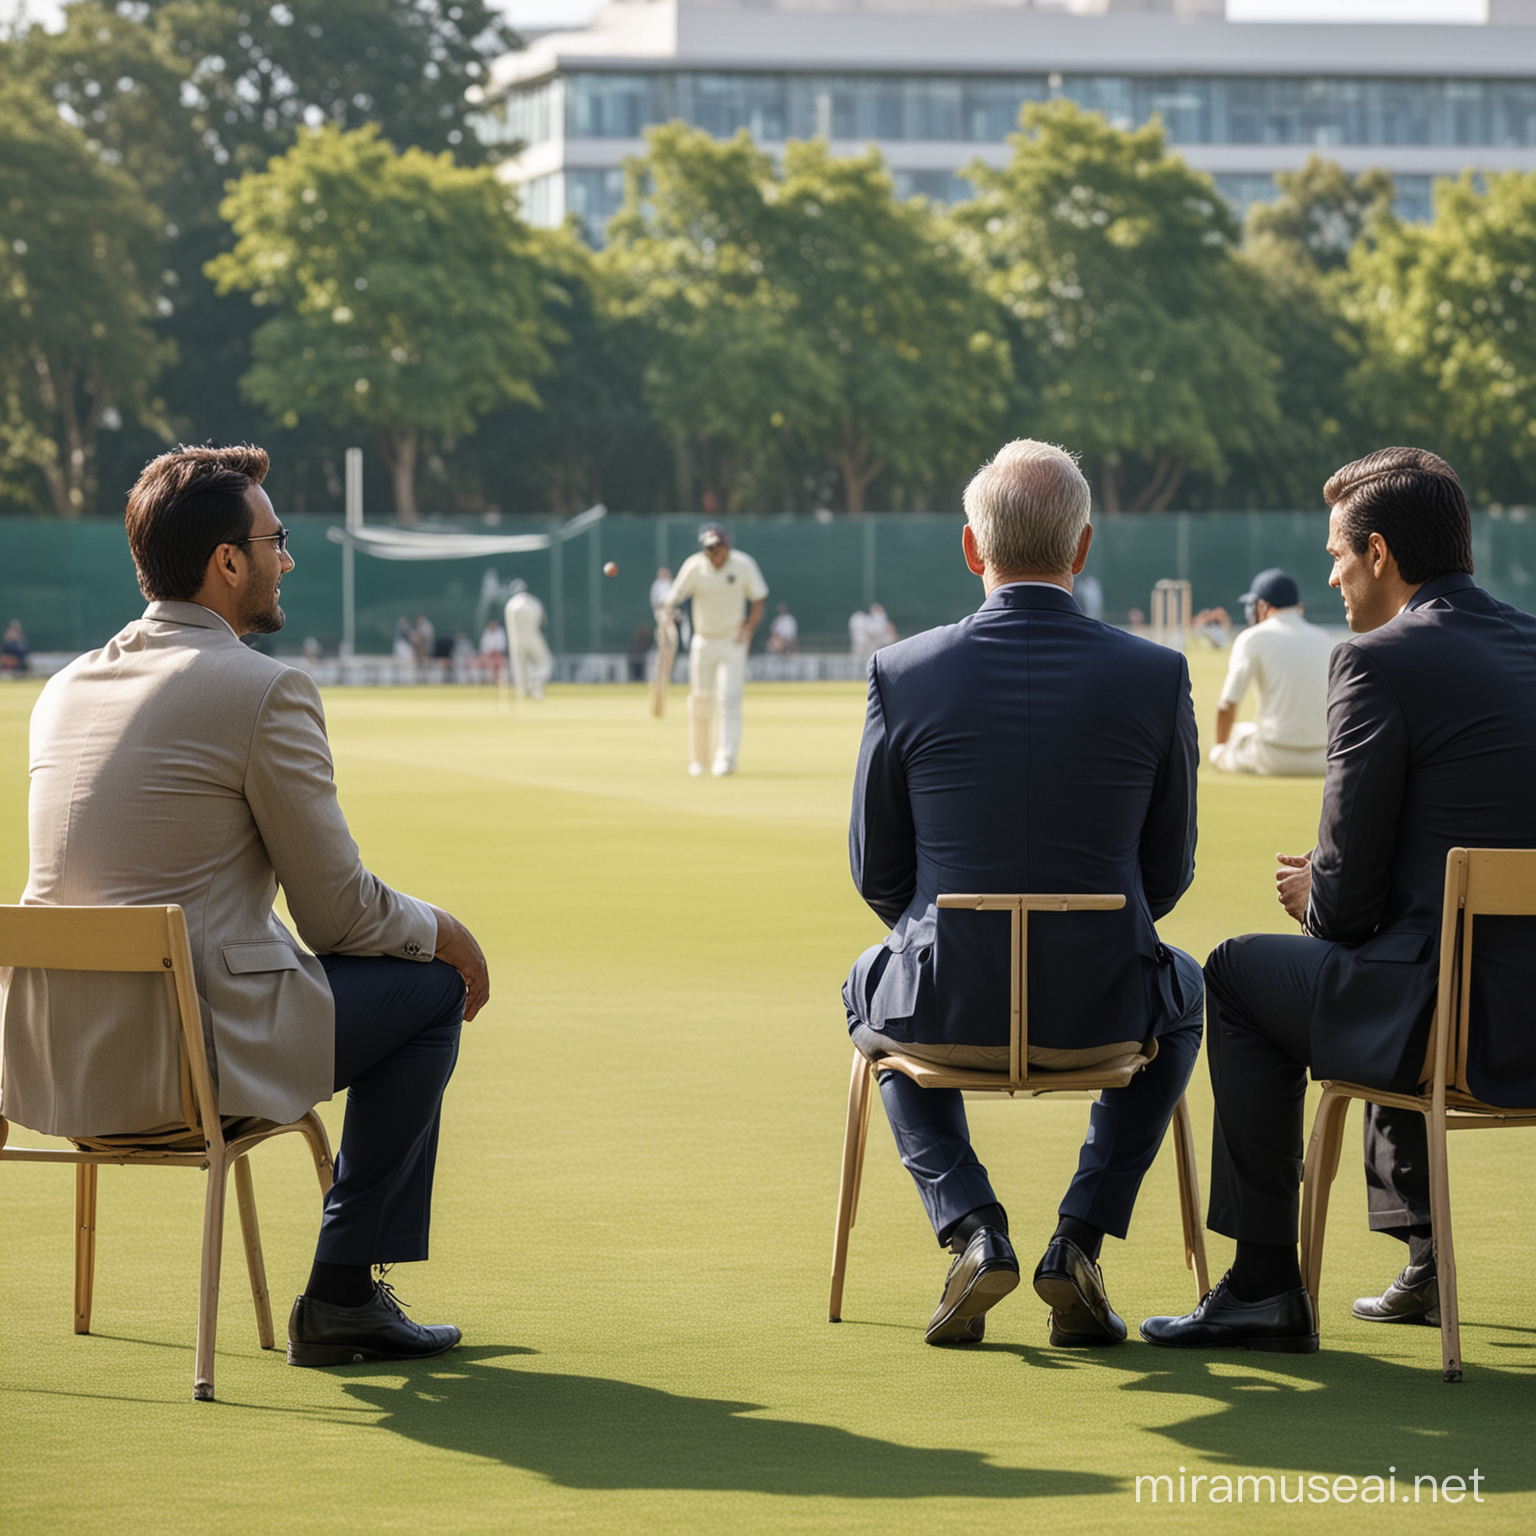 Corporate Leaders Engaged in Informal Cricket Discussion